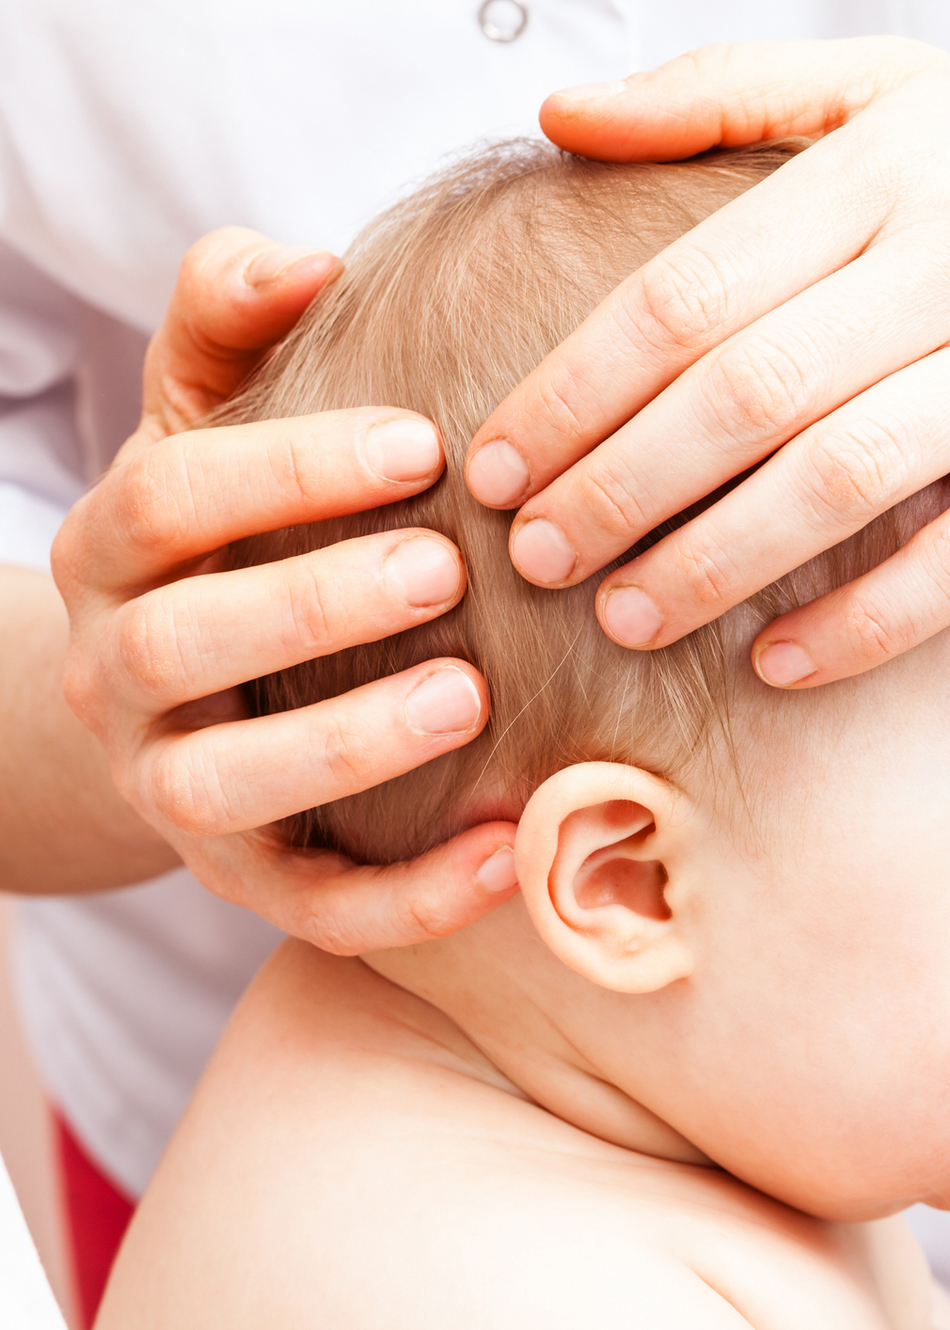 Surgical Options for Treating Craniosynostosis